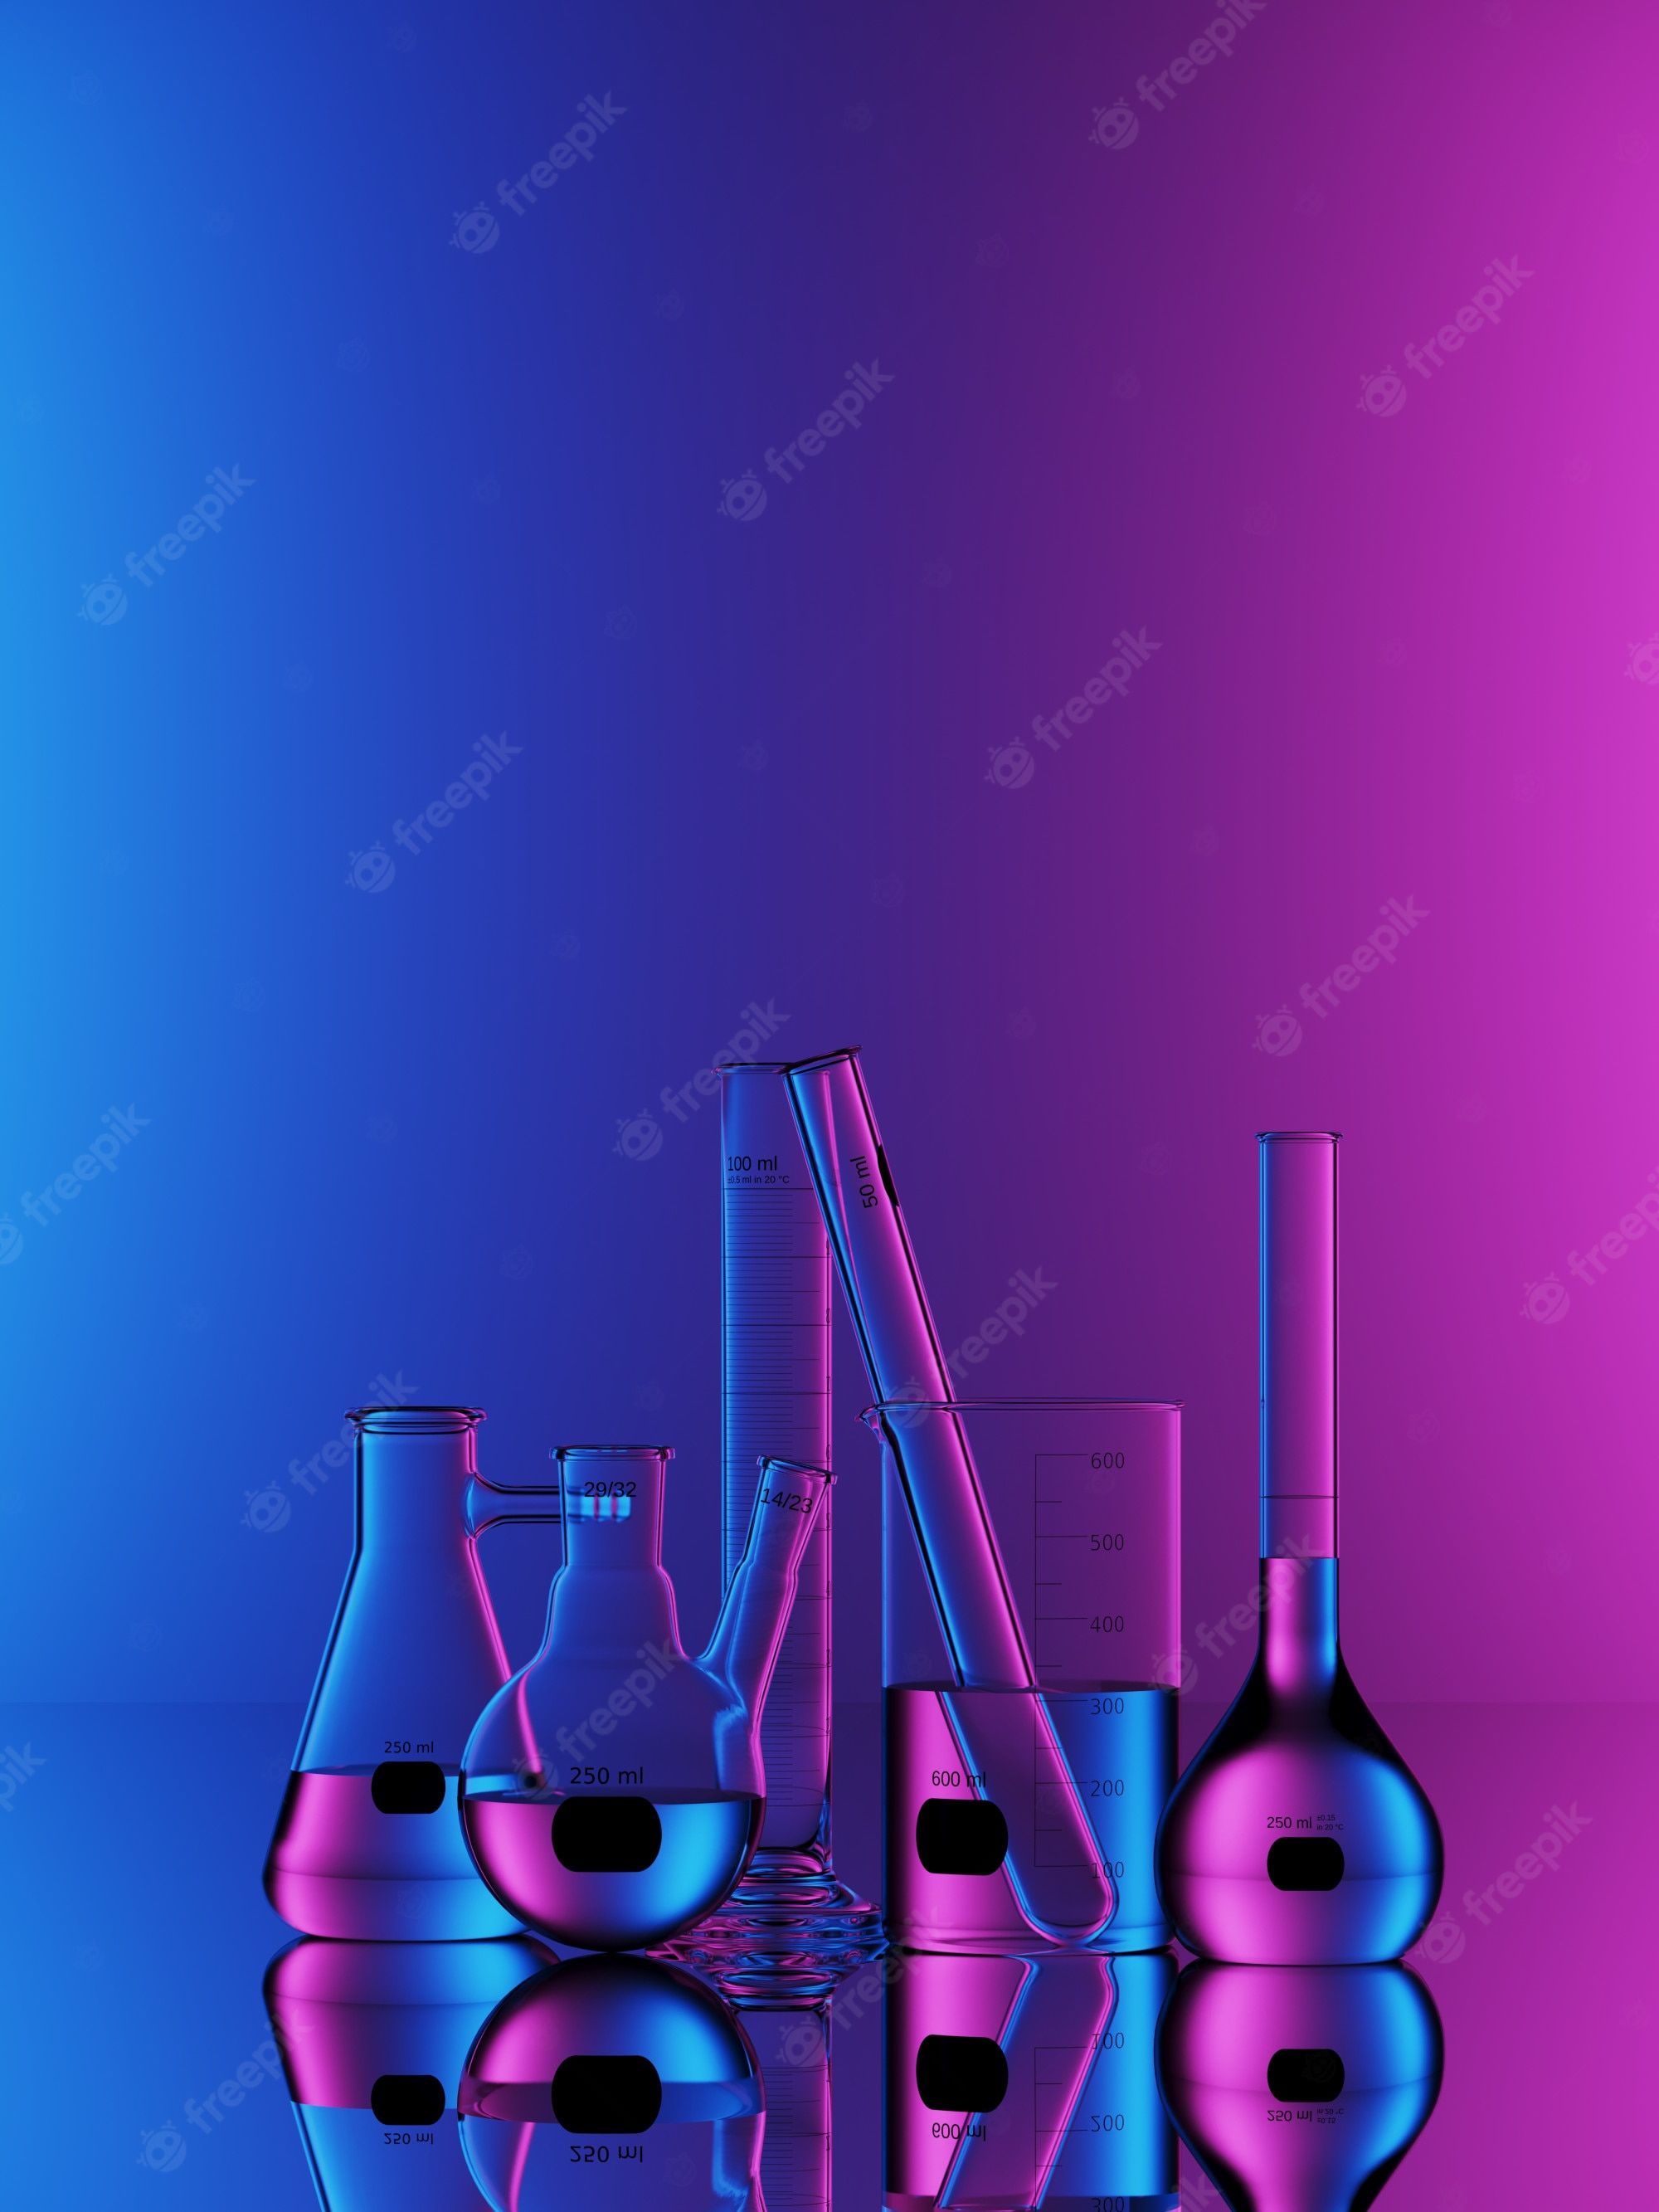 A group of laboratory glassware against a purple and blue background - Chemistry